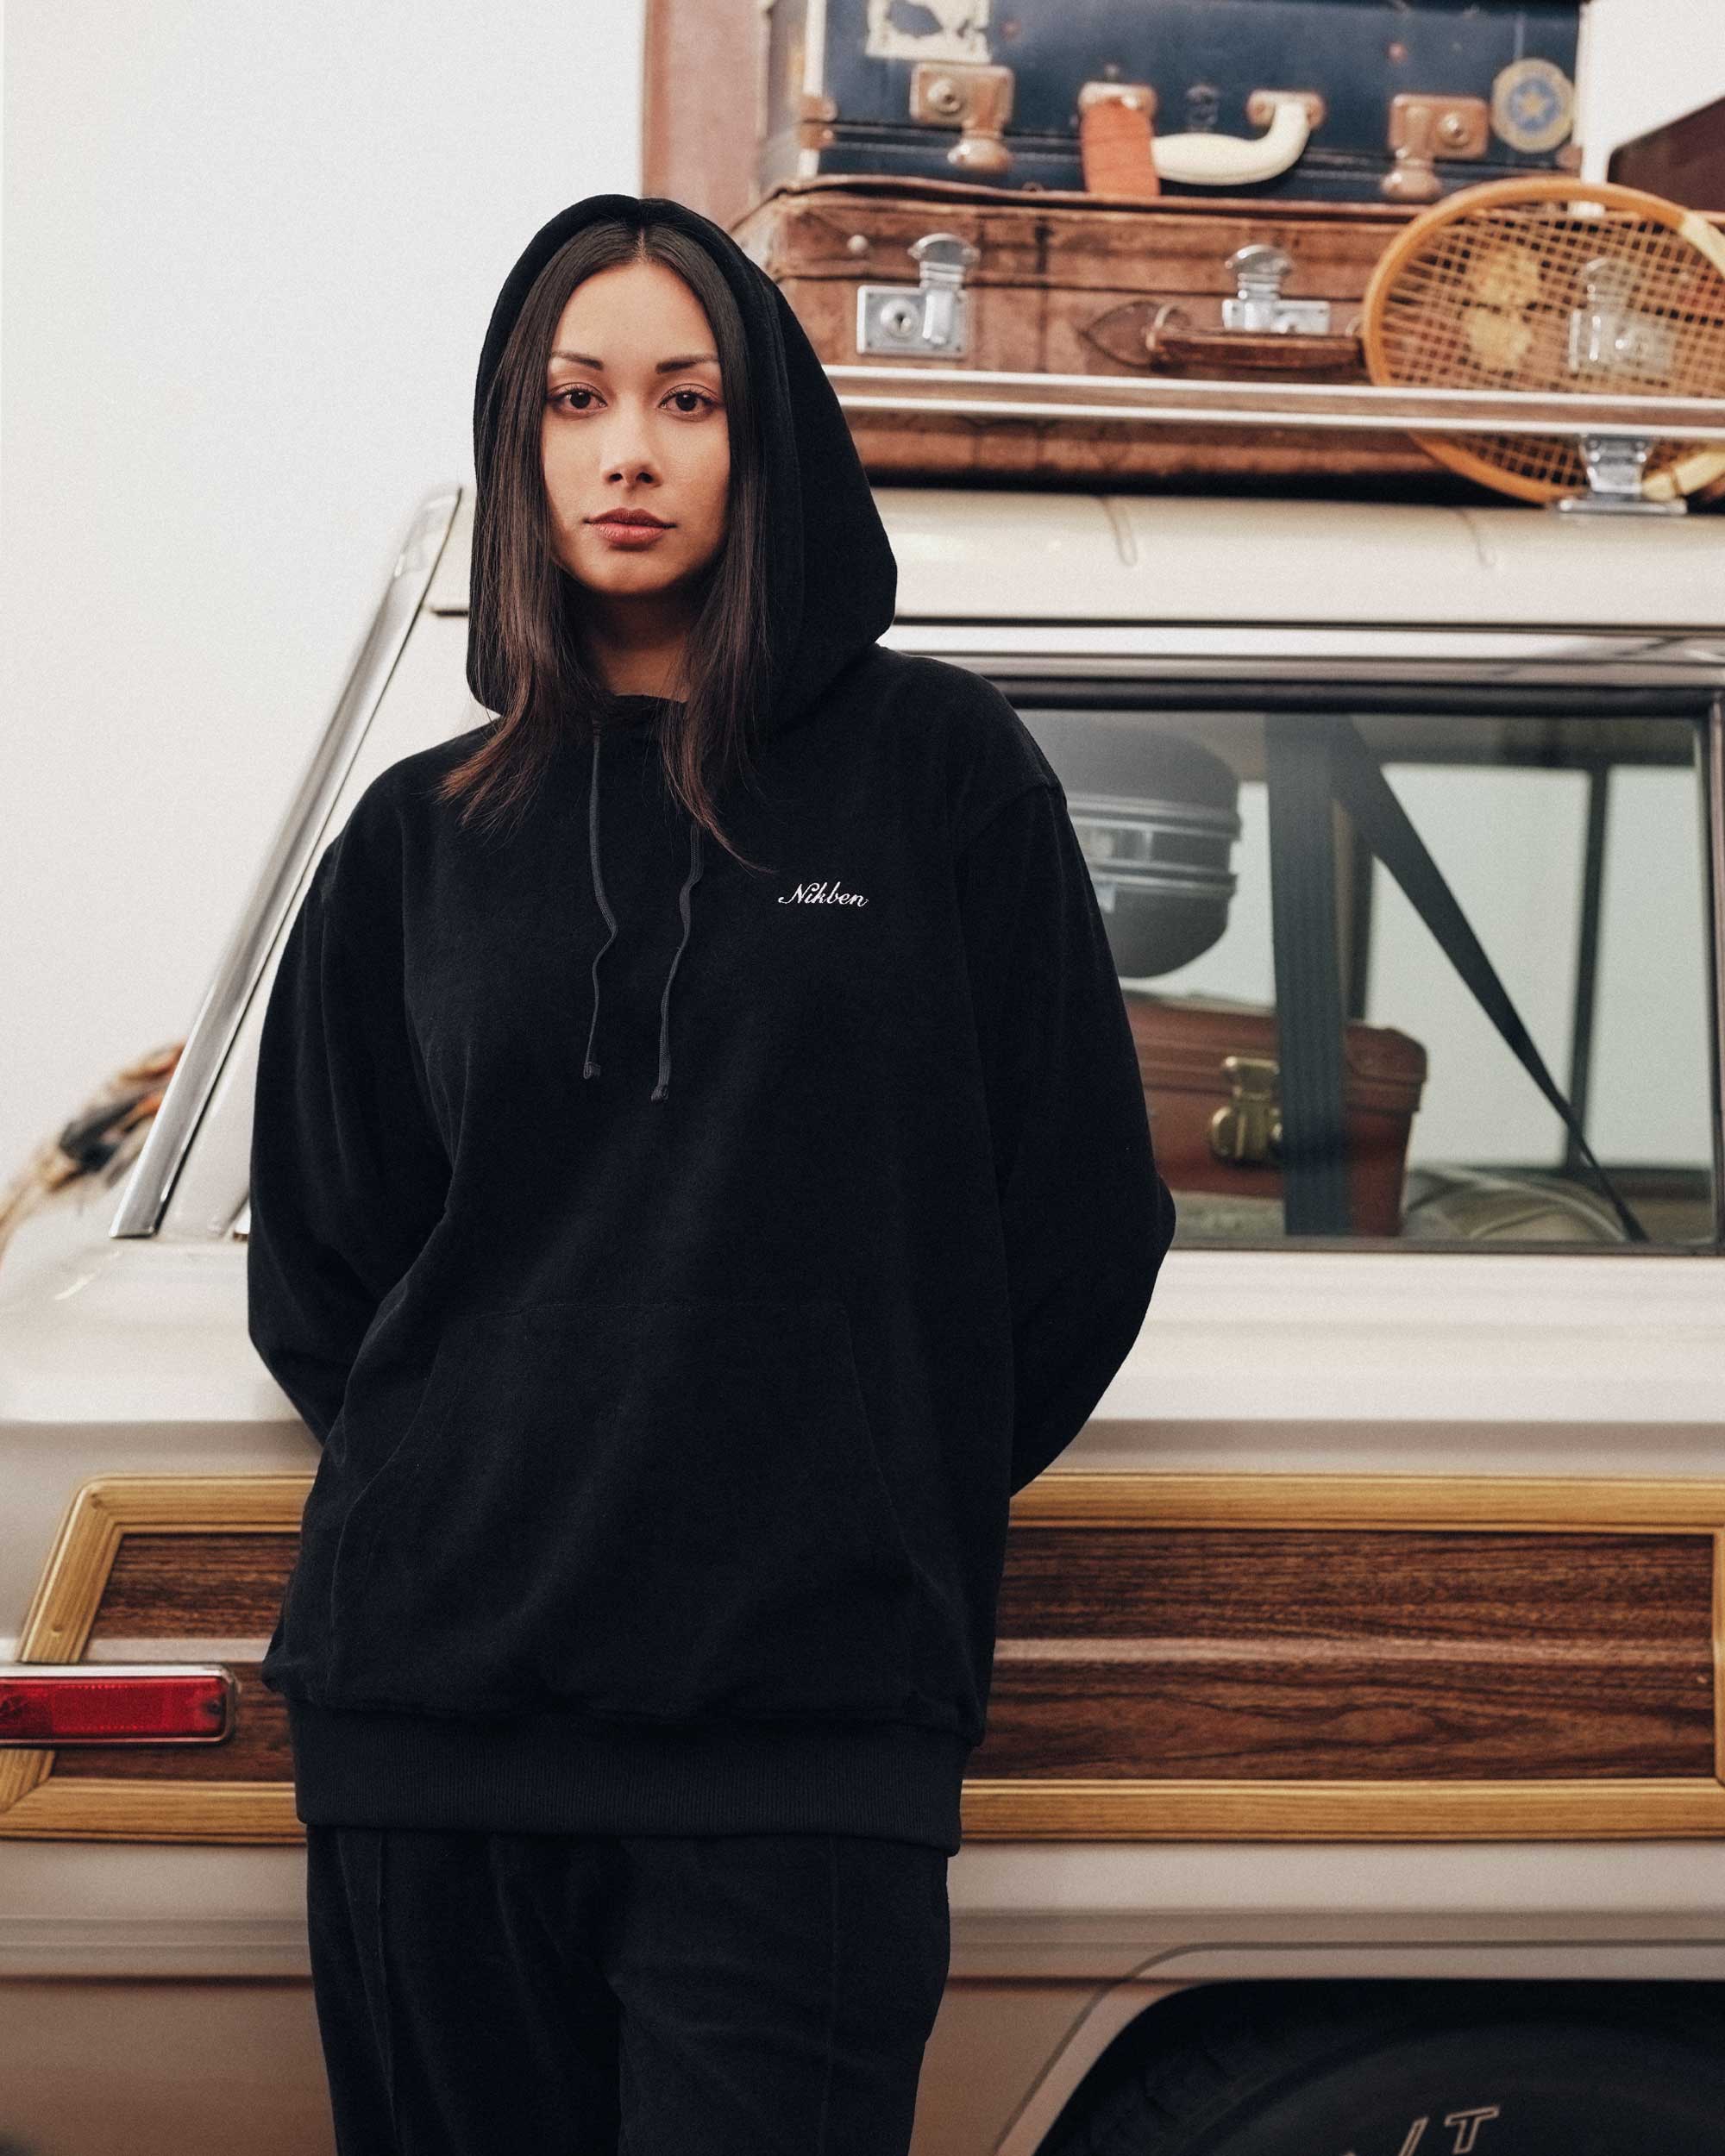 Female model wearing a black hoodie with drawstrings, a single front pocket, and a white "Nikben" logo on the chest.